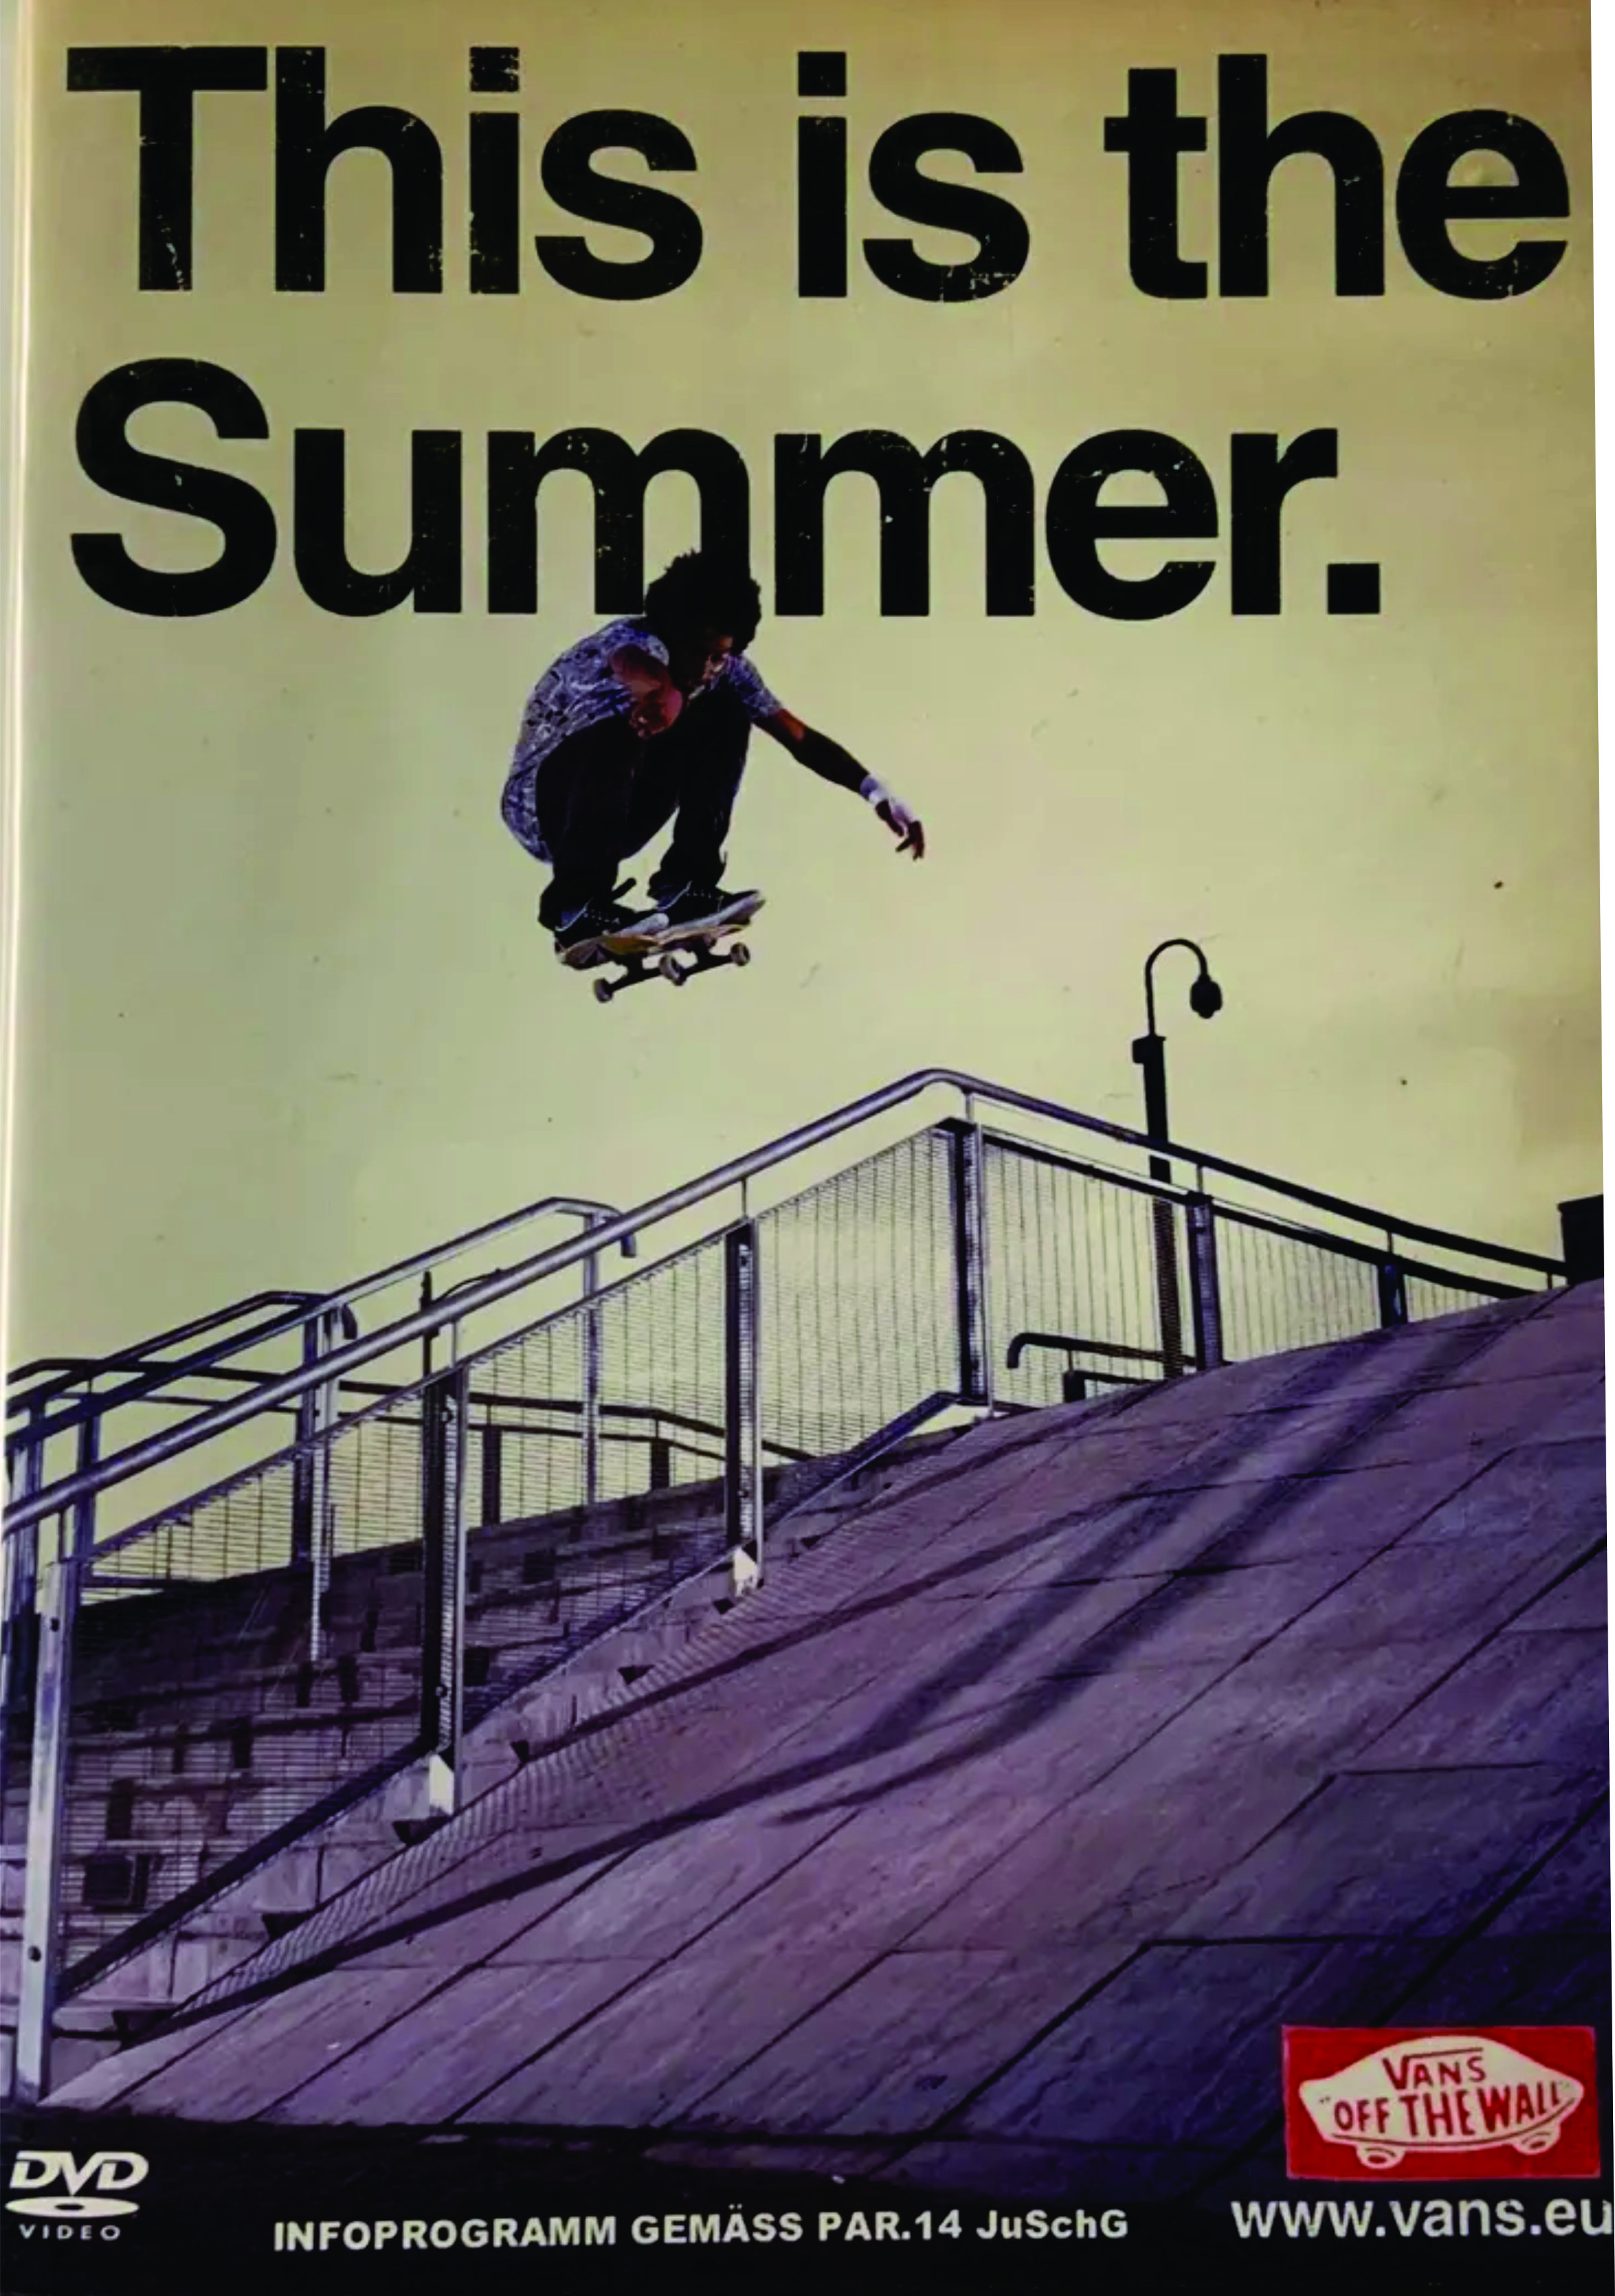 Vans Europe - This Is The Summer cover